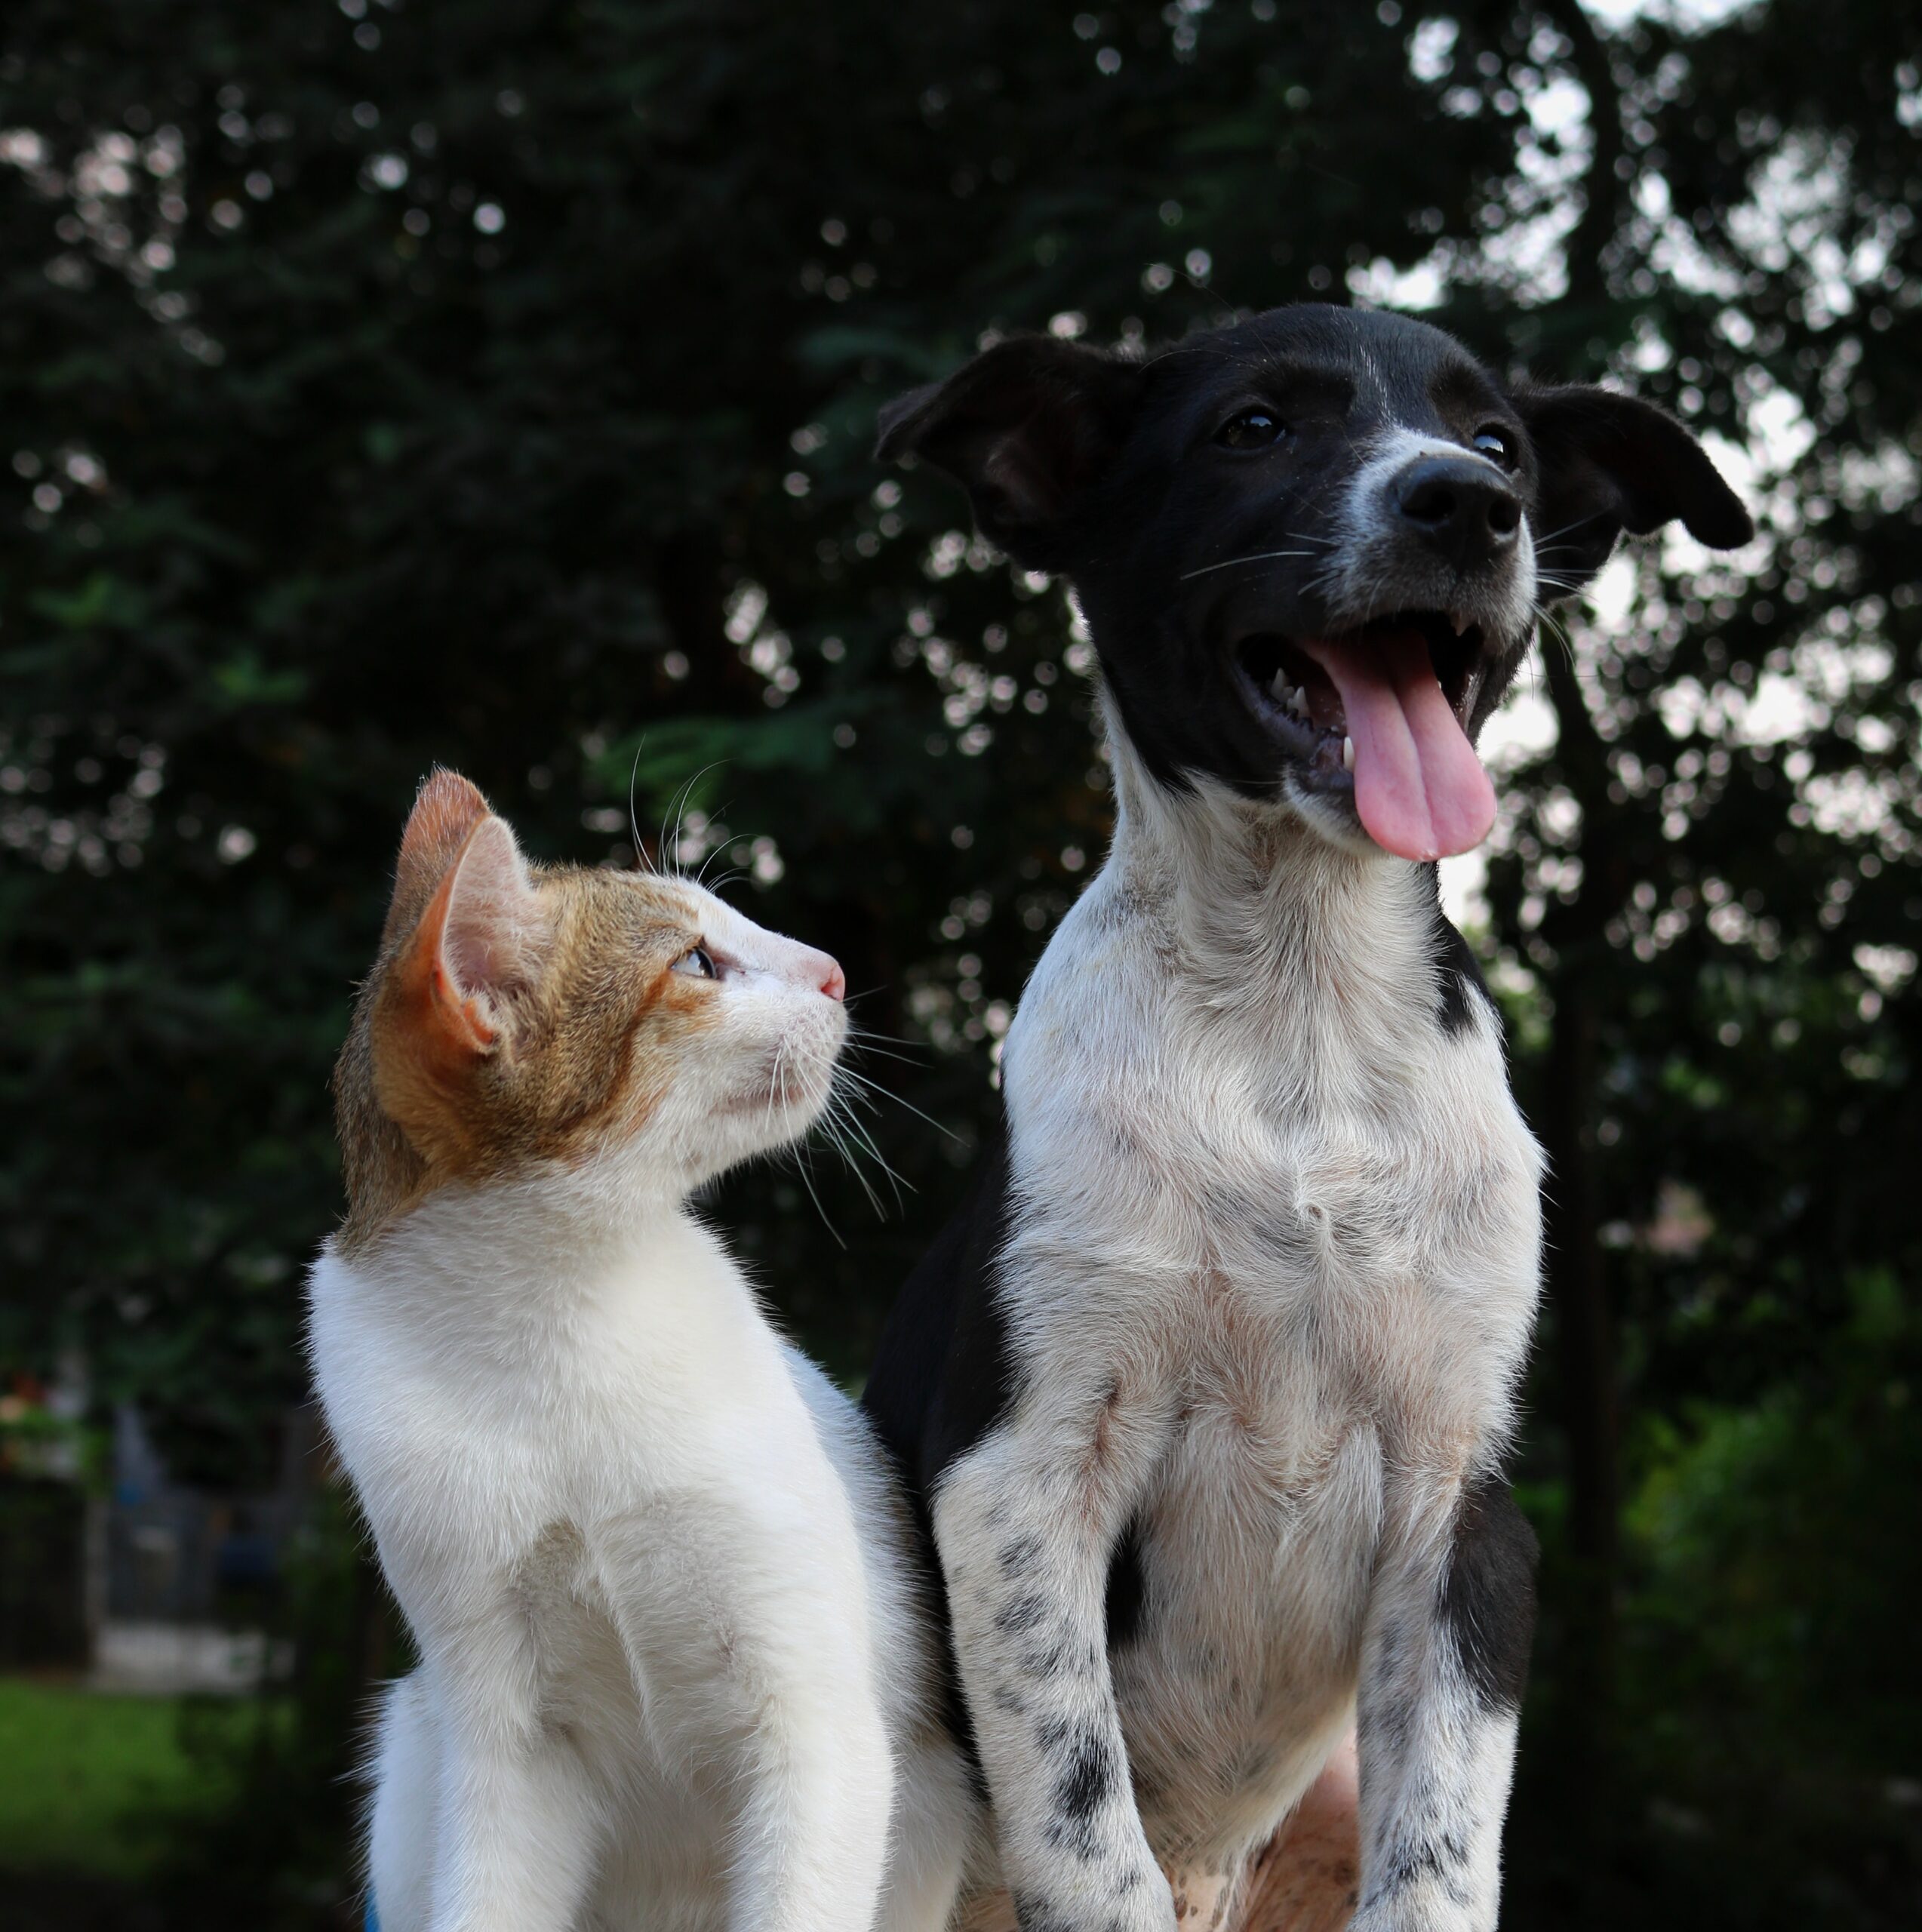 An orange and white cat sits beside a slightly taller black and white dog outside. The cat is looking up at the dog while the dog sticks its tongue out.